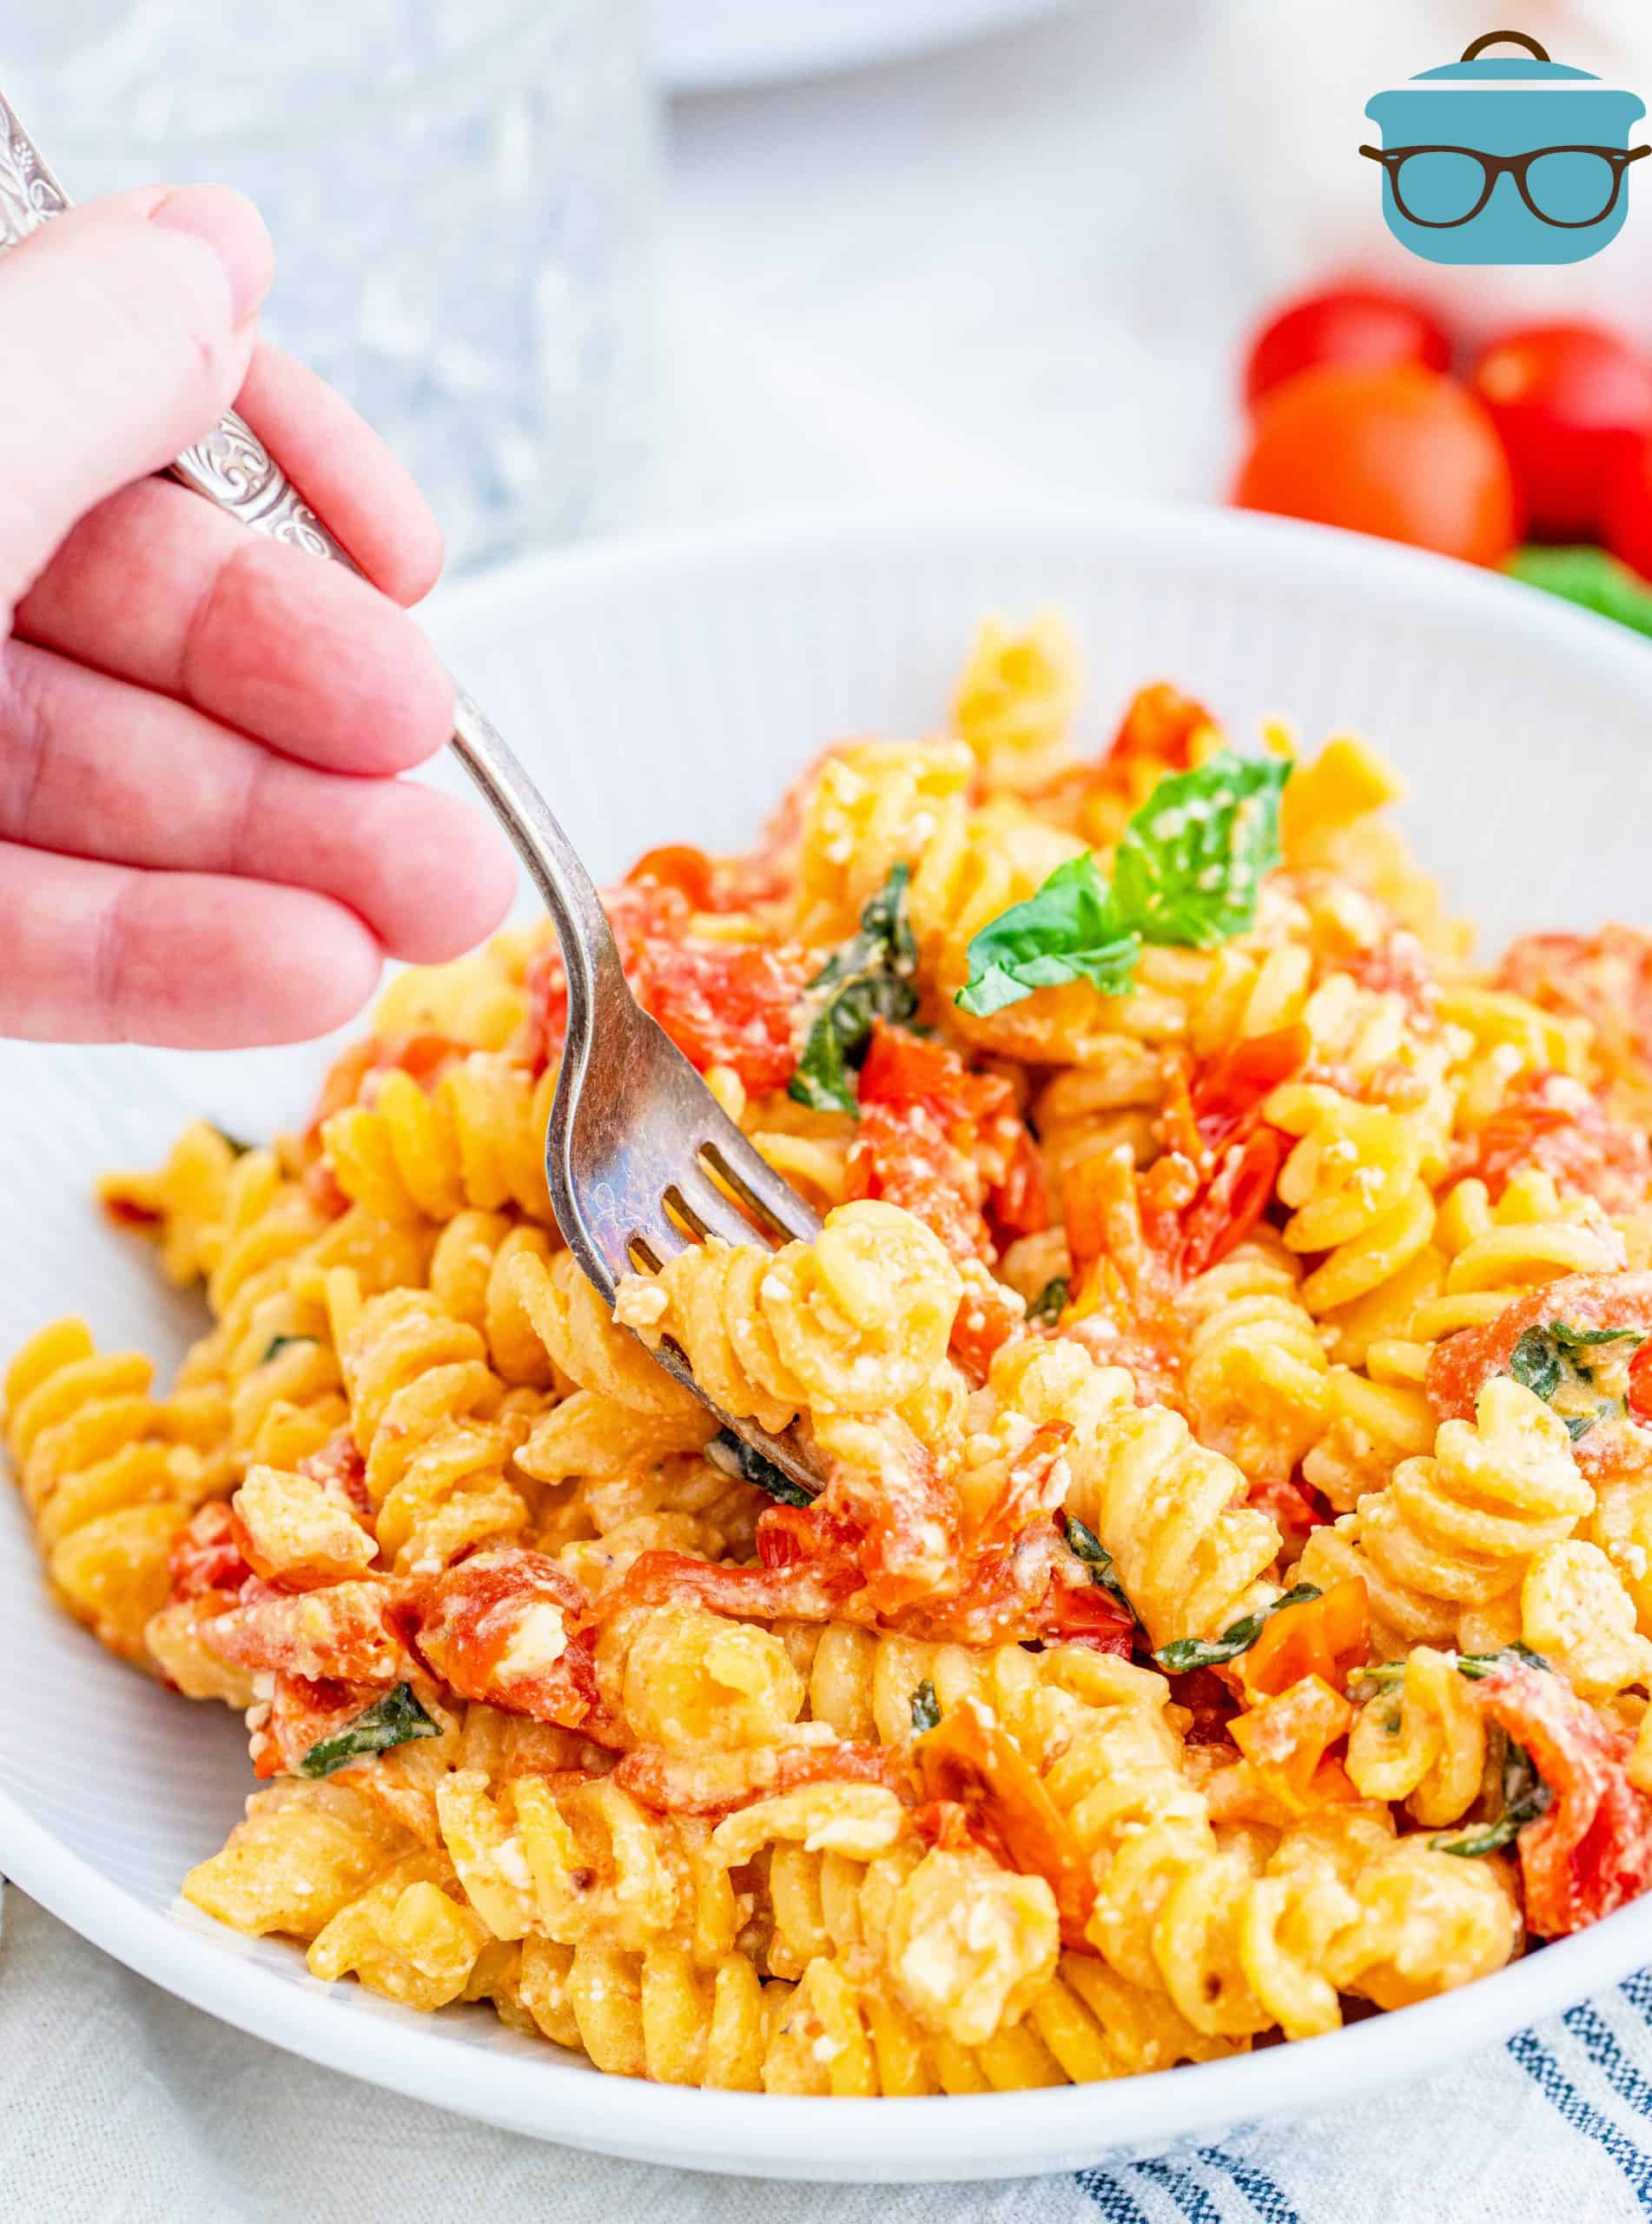 Feta Tomato Pasta in a white bowl with a fork.